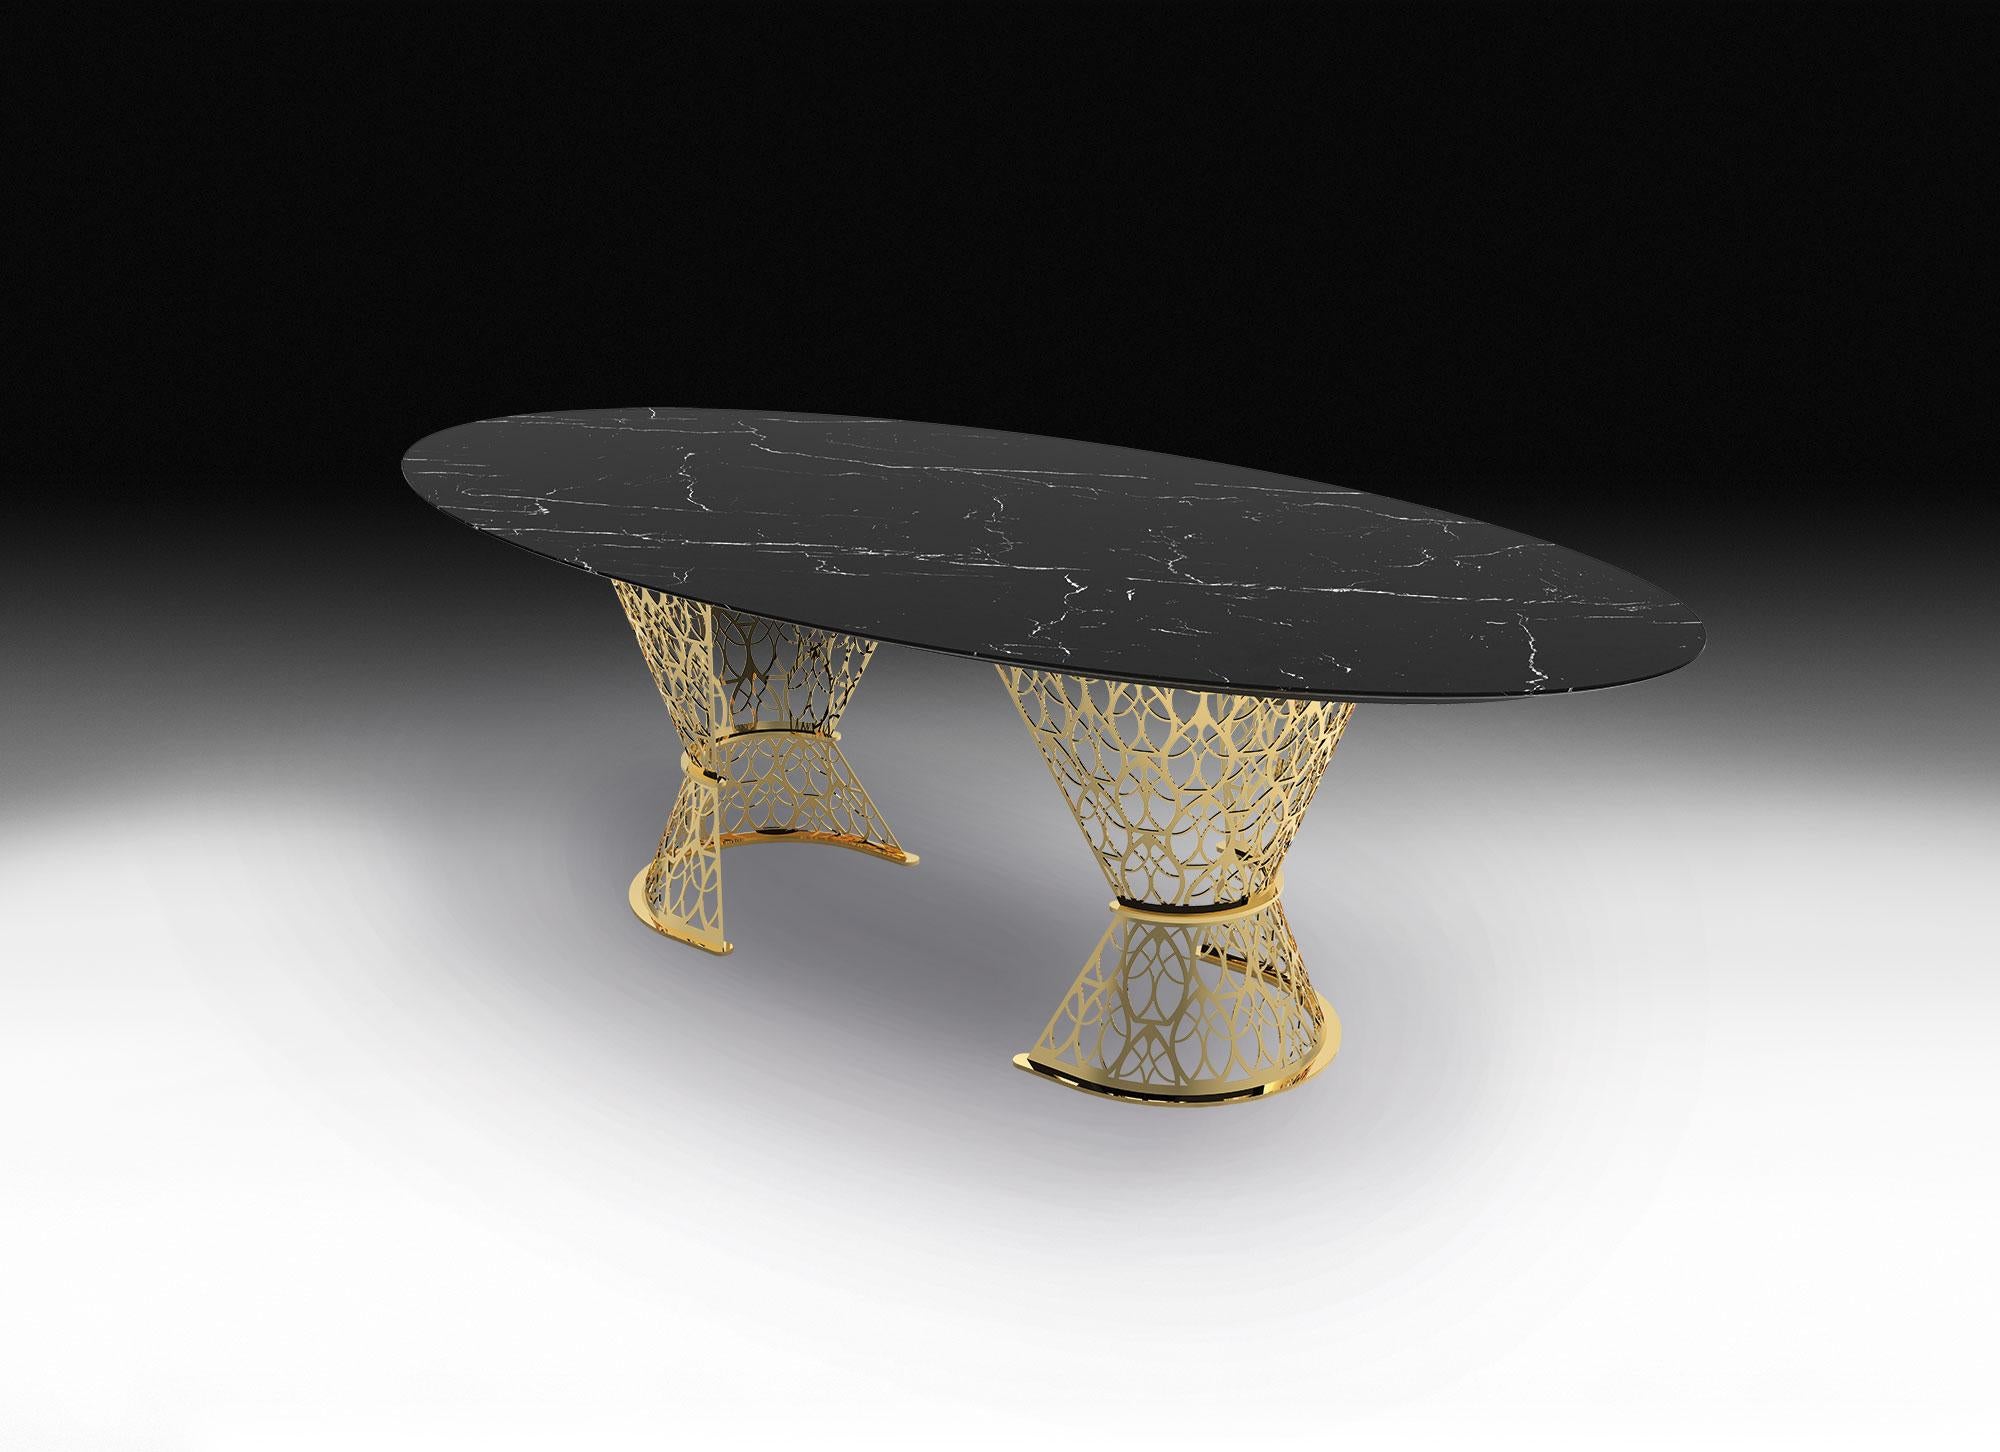 Even in the most classy atmosphere, Gatsby acts like a luxurious and majestic table, born to catch eyes.

The unexpected mixture of marble and perforated metal gives life to an impressive table, in which even classic shapes are reinterpreted with